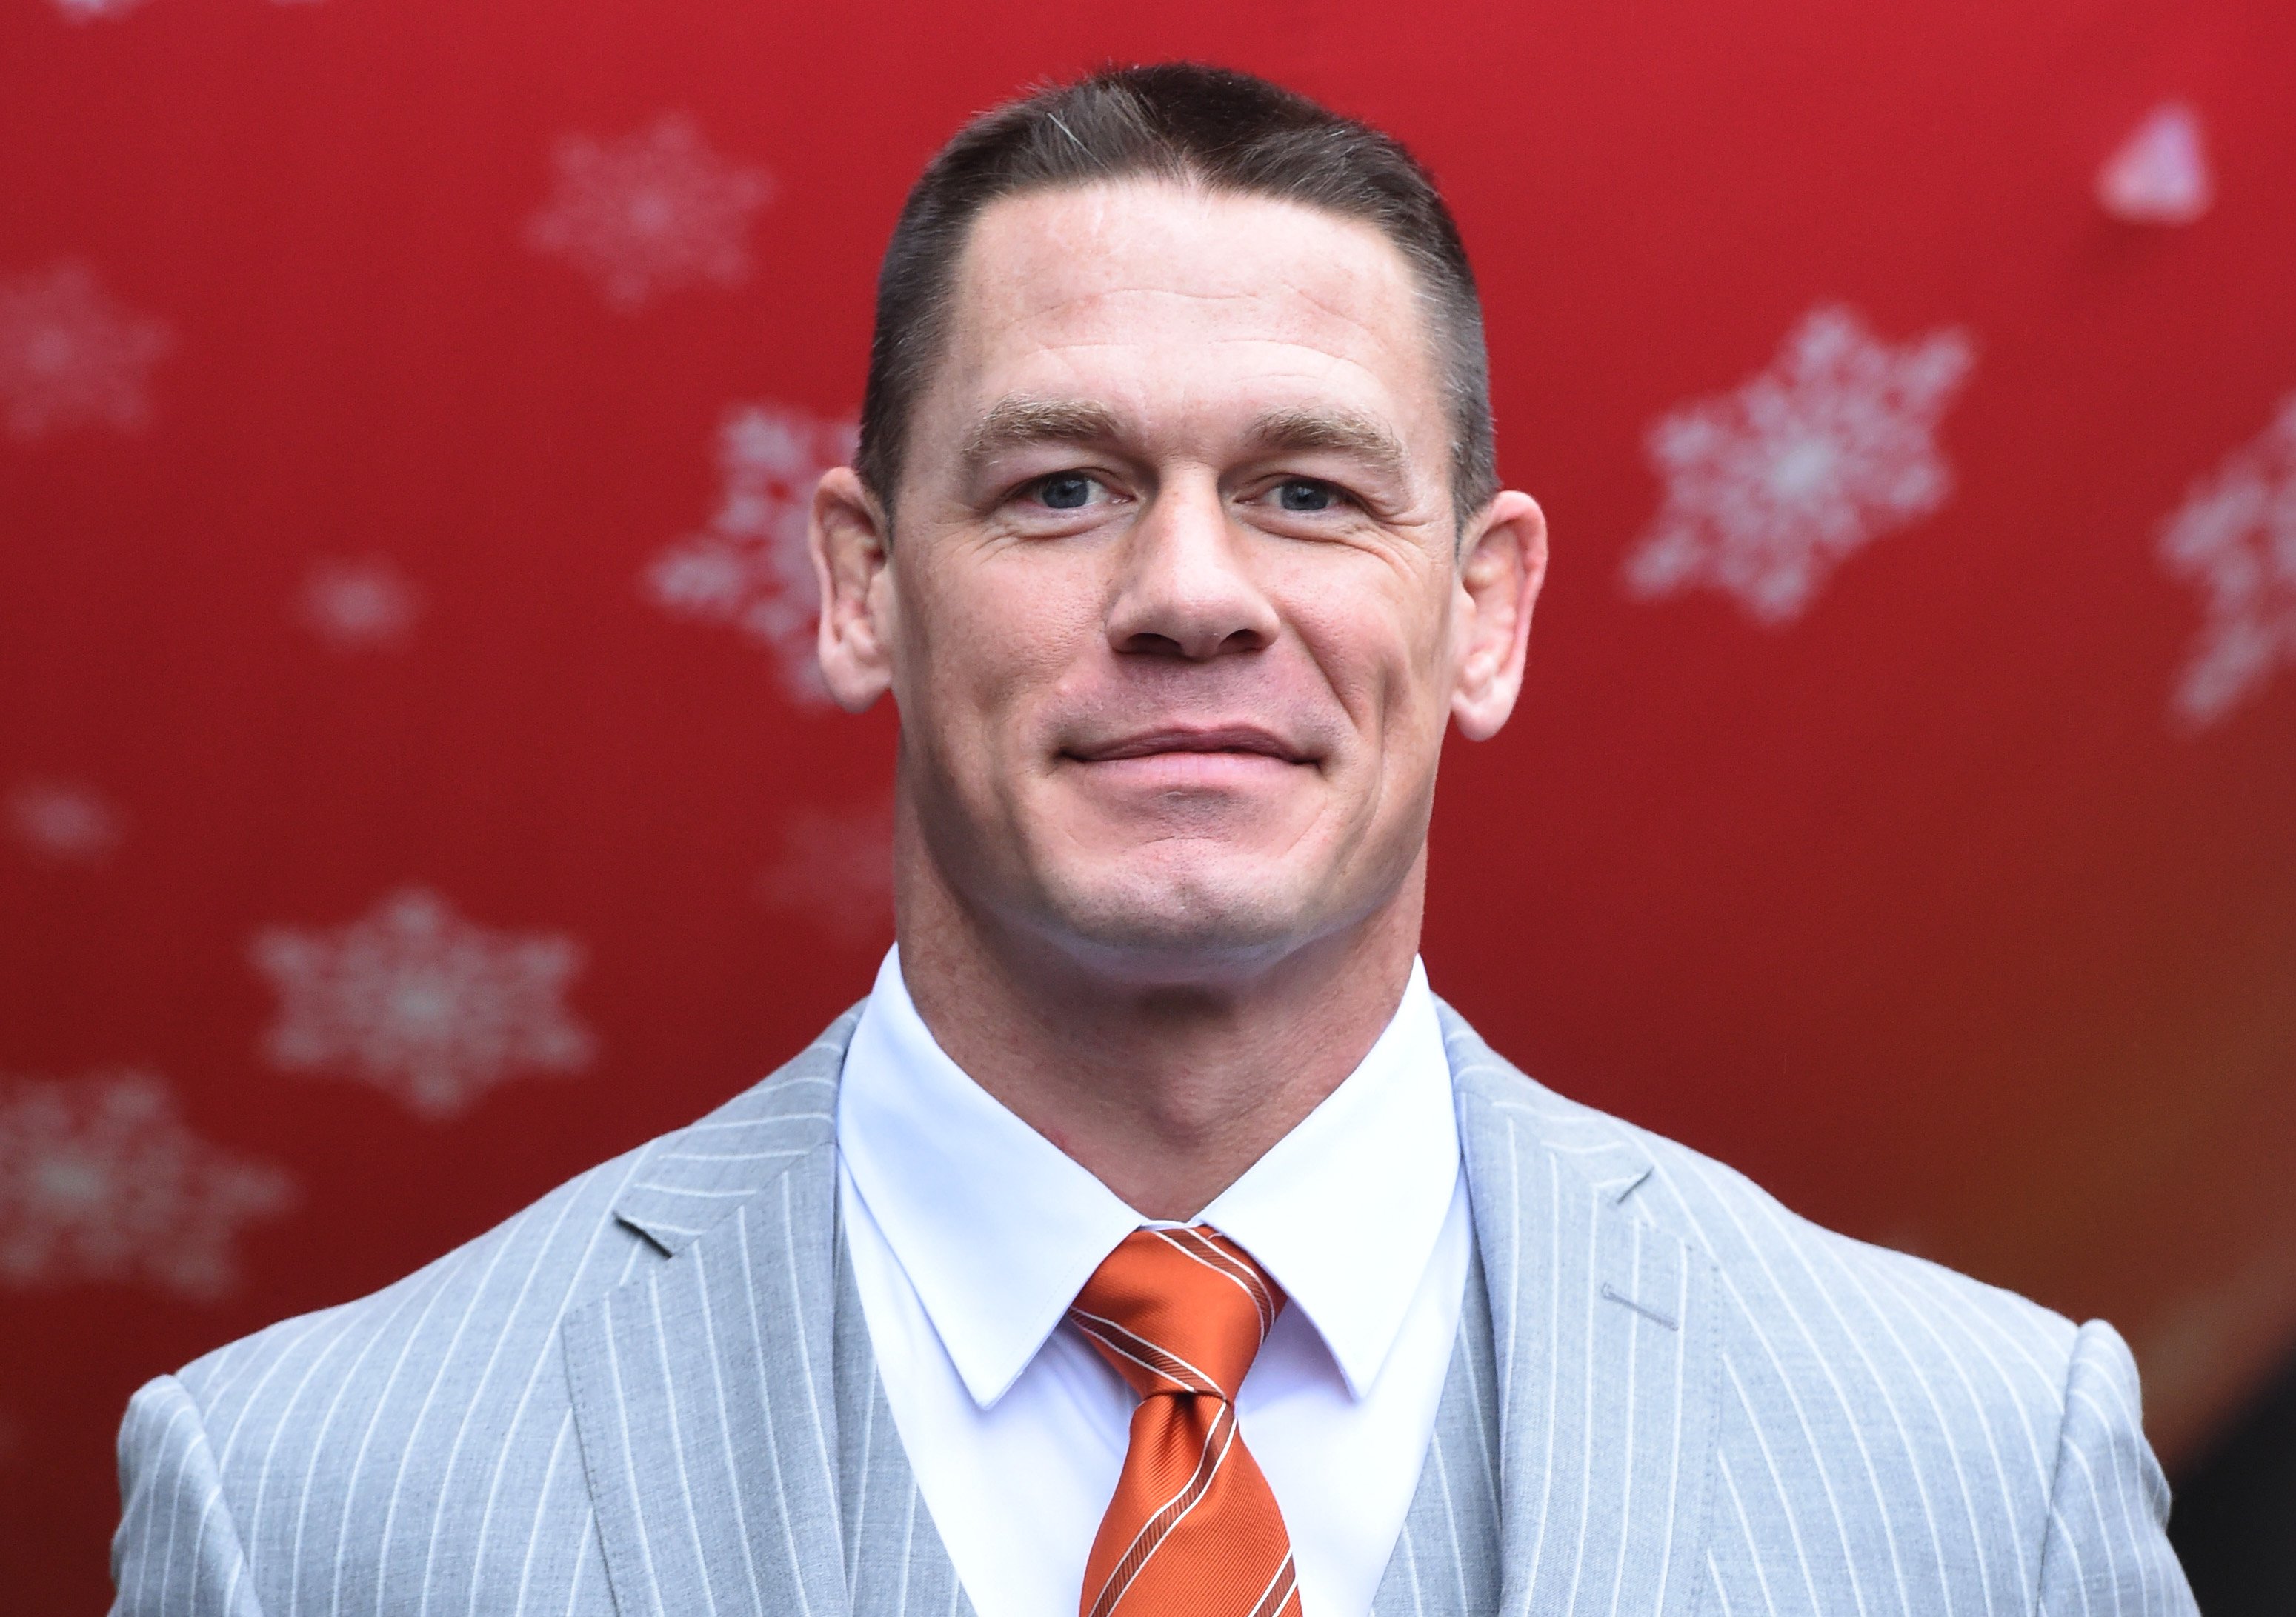 John Cena attends the 'Ferdinand' special screening at BFI Southbank on December 3, 2017 in London, England | Photo: Getty Images